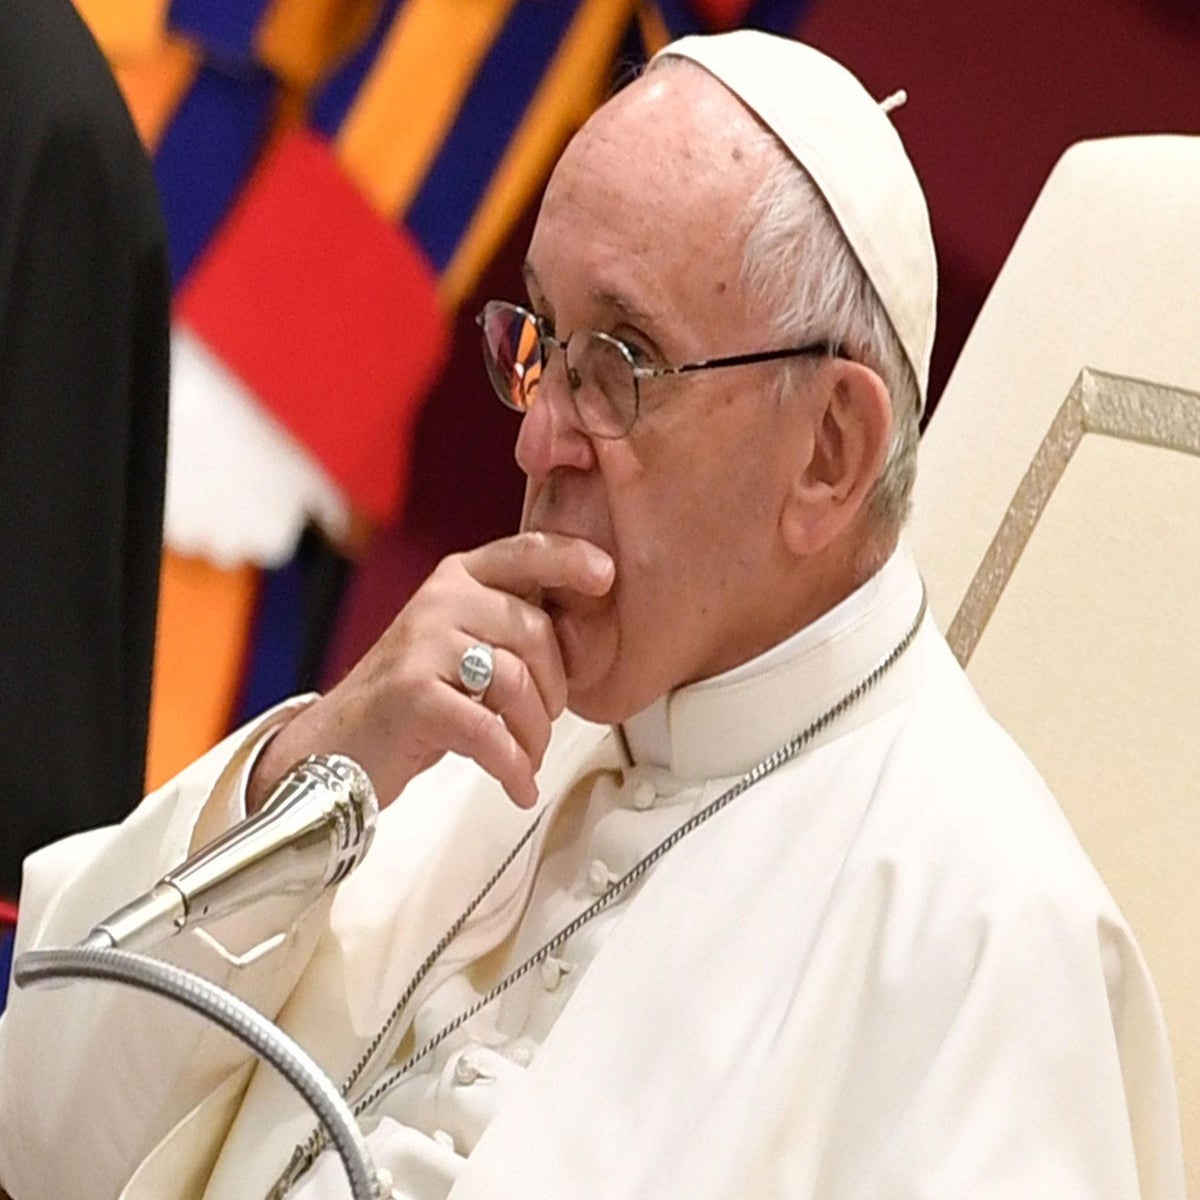 Francis says Satan is a smart person should not argue with | The Independent The Independent